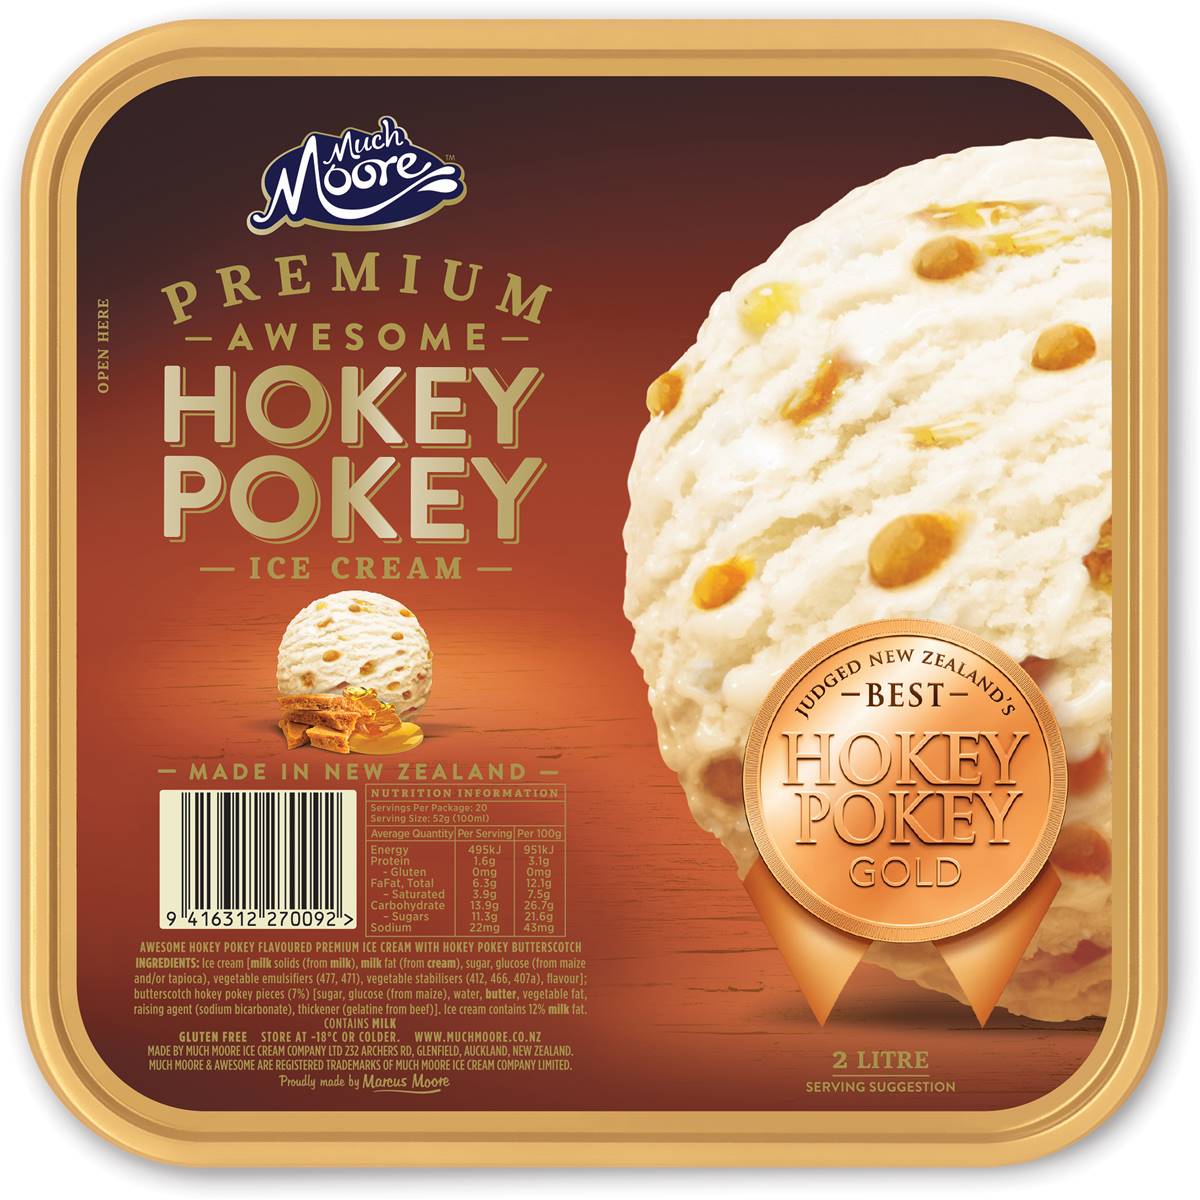 Calories in Much Moore Awesome Hokey Pokey Ice Cream Tub